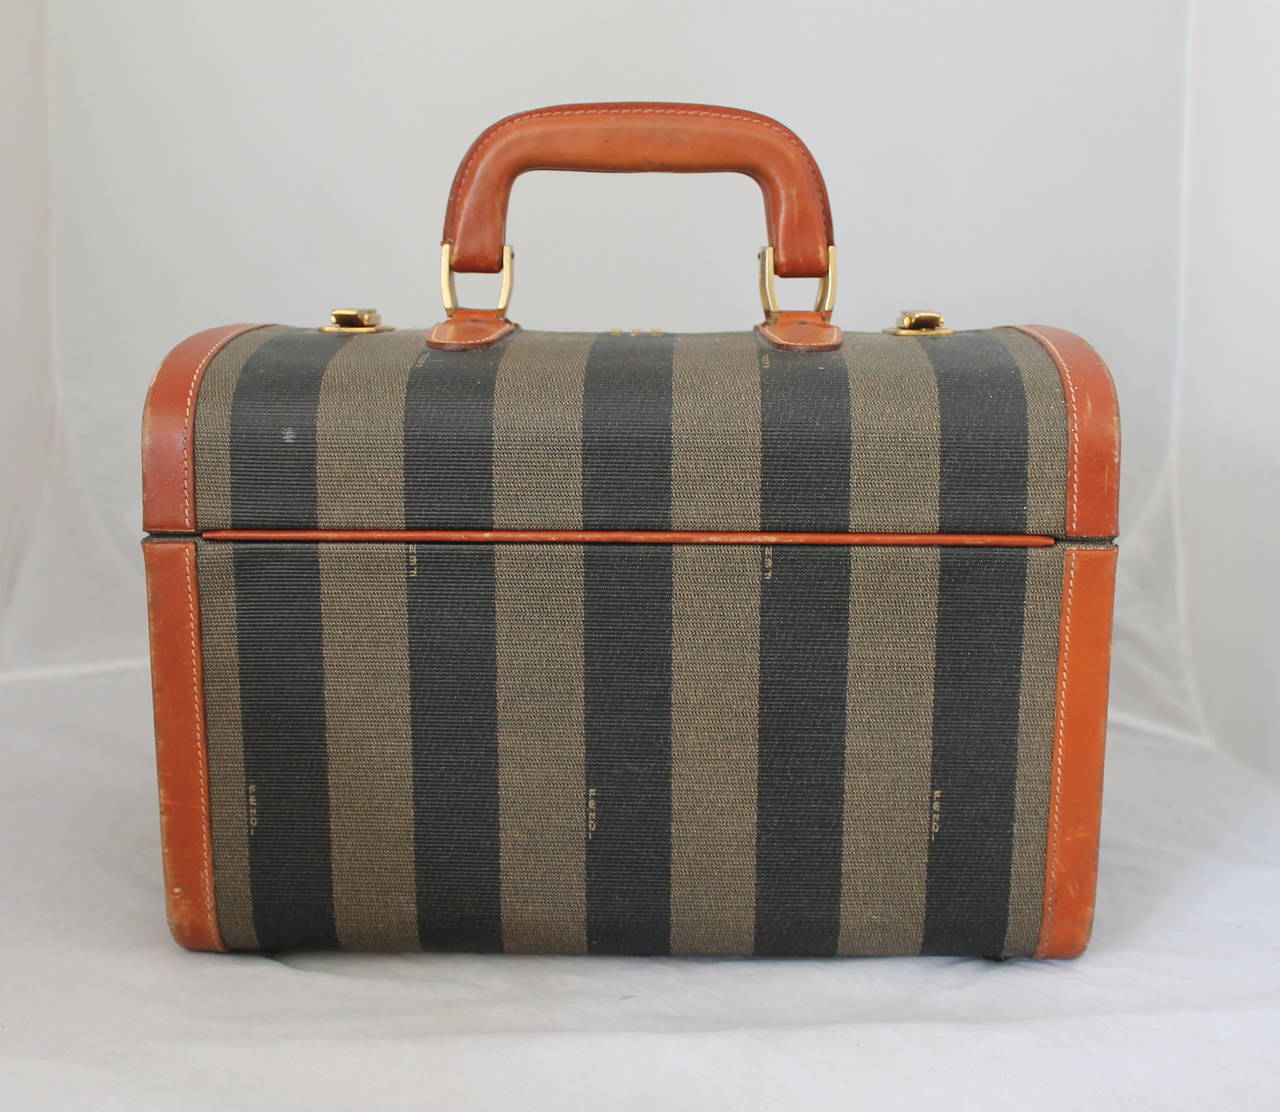 Fendi 1980's Vintage Olive & Black Striped Small Trunk with Brown Leather. It is in fair vintage condition with visible wear. It has 2 gold closures and a numeric lock. There is scuffing all along the leather trim, one visible marking on the handle,